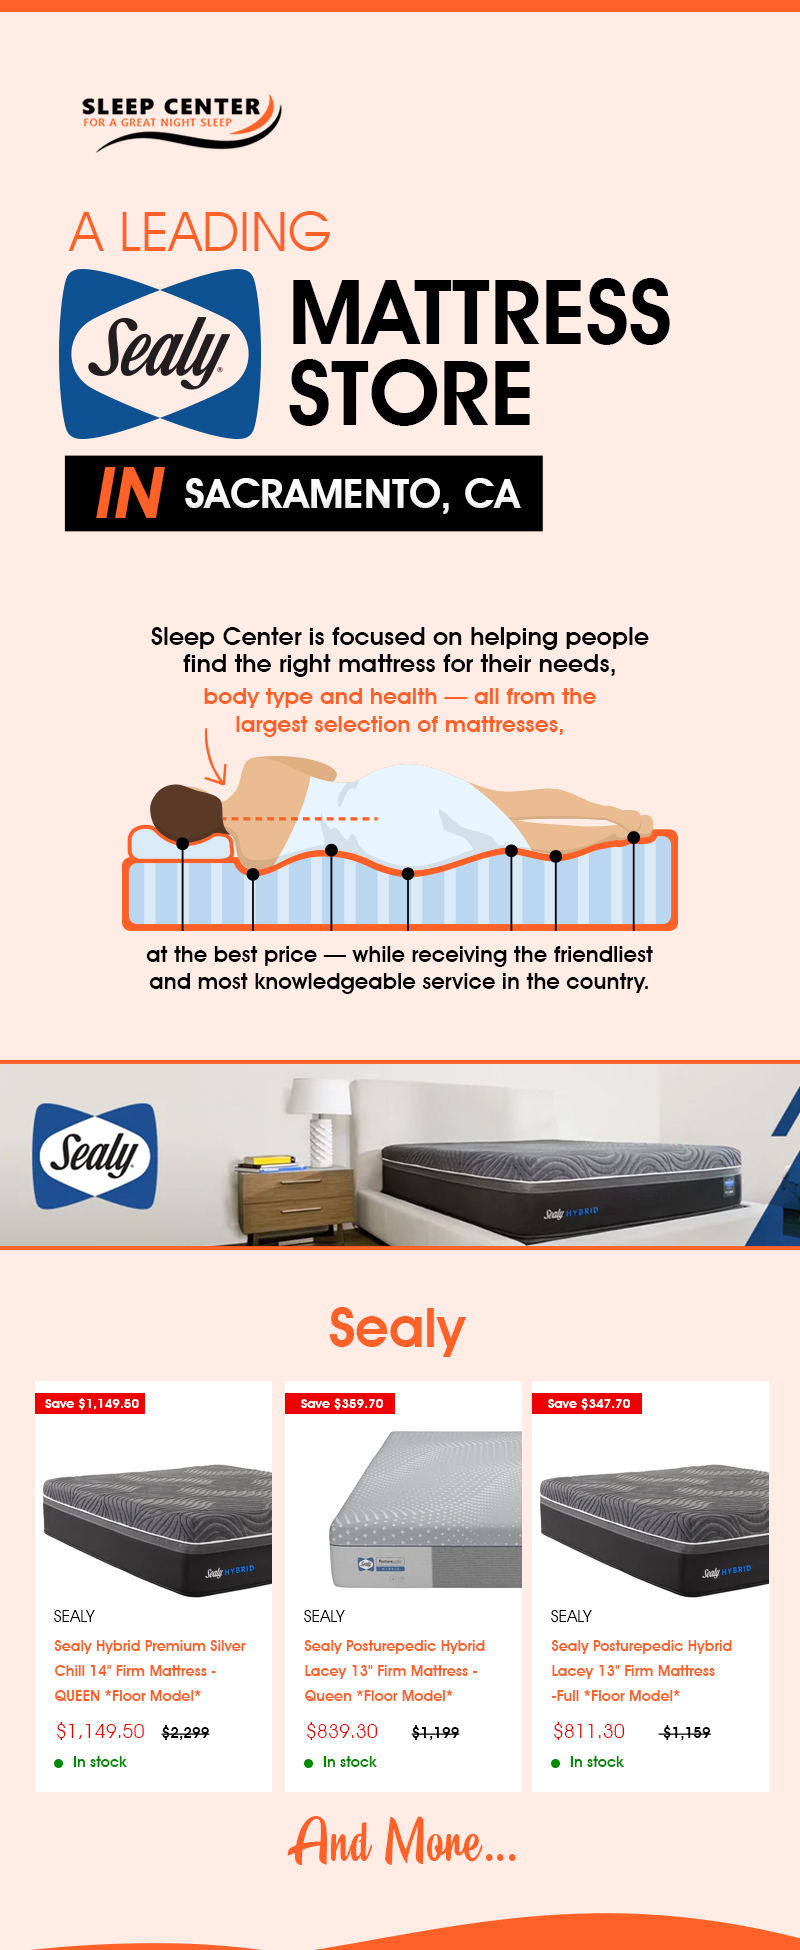 Shop for the Modern and Stylish Sealy You Can Buy Online from Sleep Center